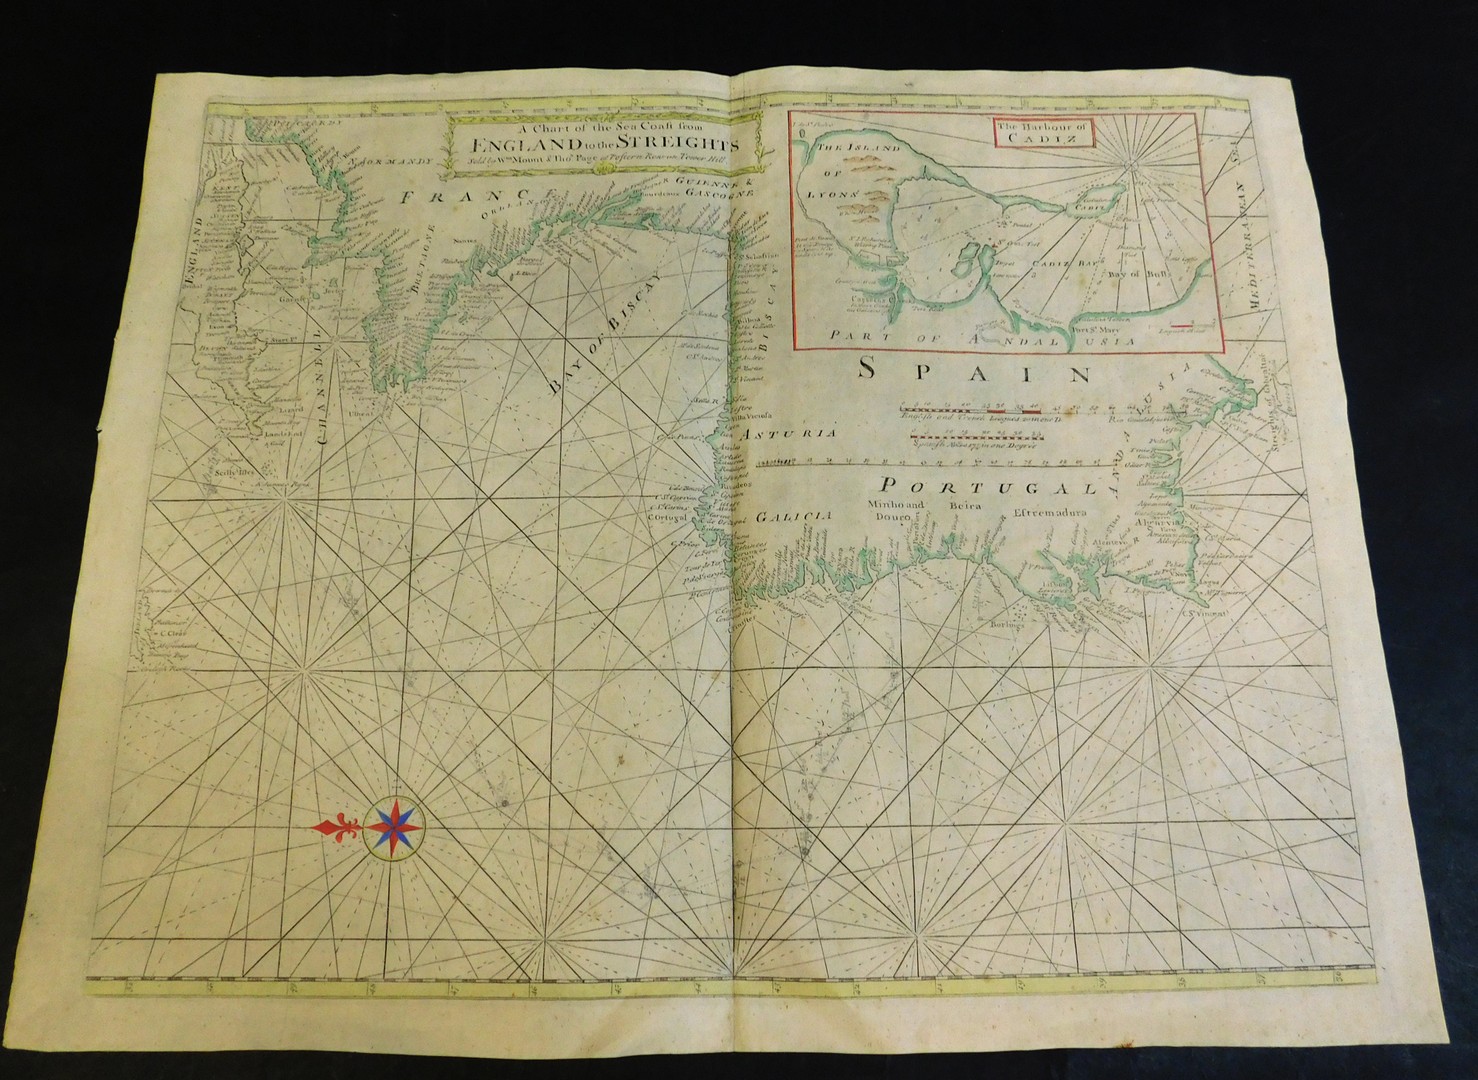 WILLIAM MOUNT AND THOMAS PAGE: A CHART OF THE SEA COAST FROM ENGLAND TO THE STRAITS, [circa 1740],